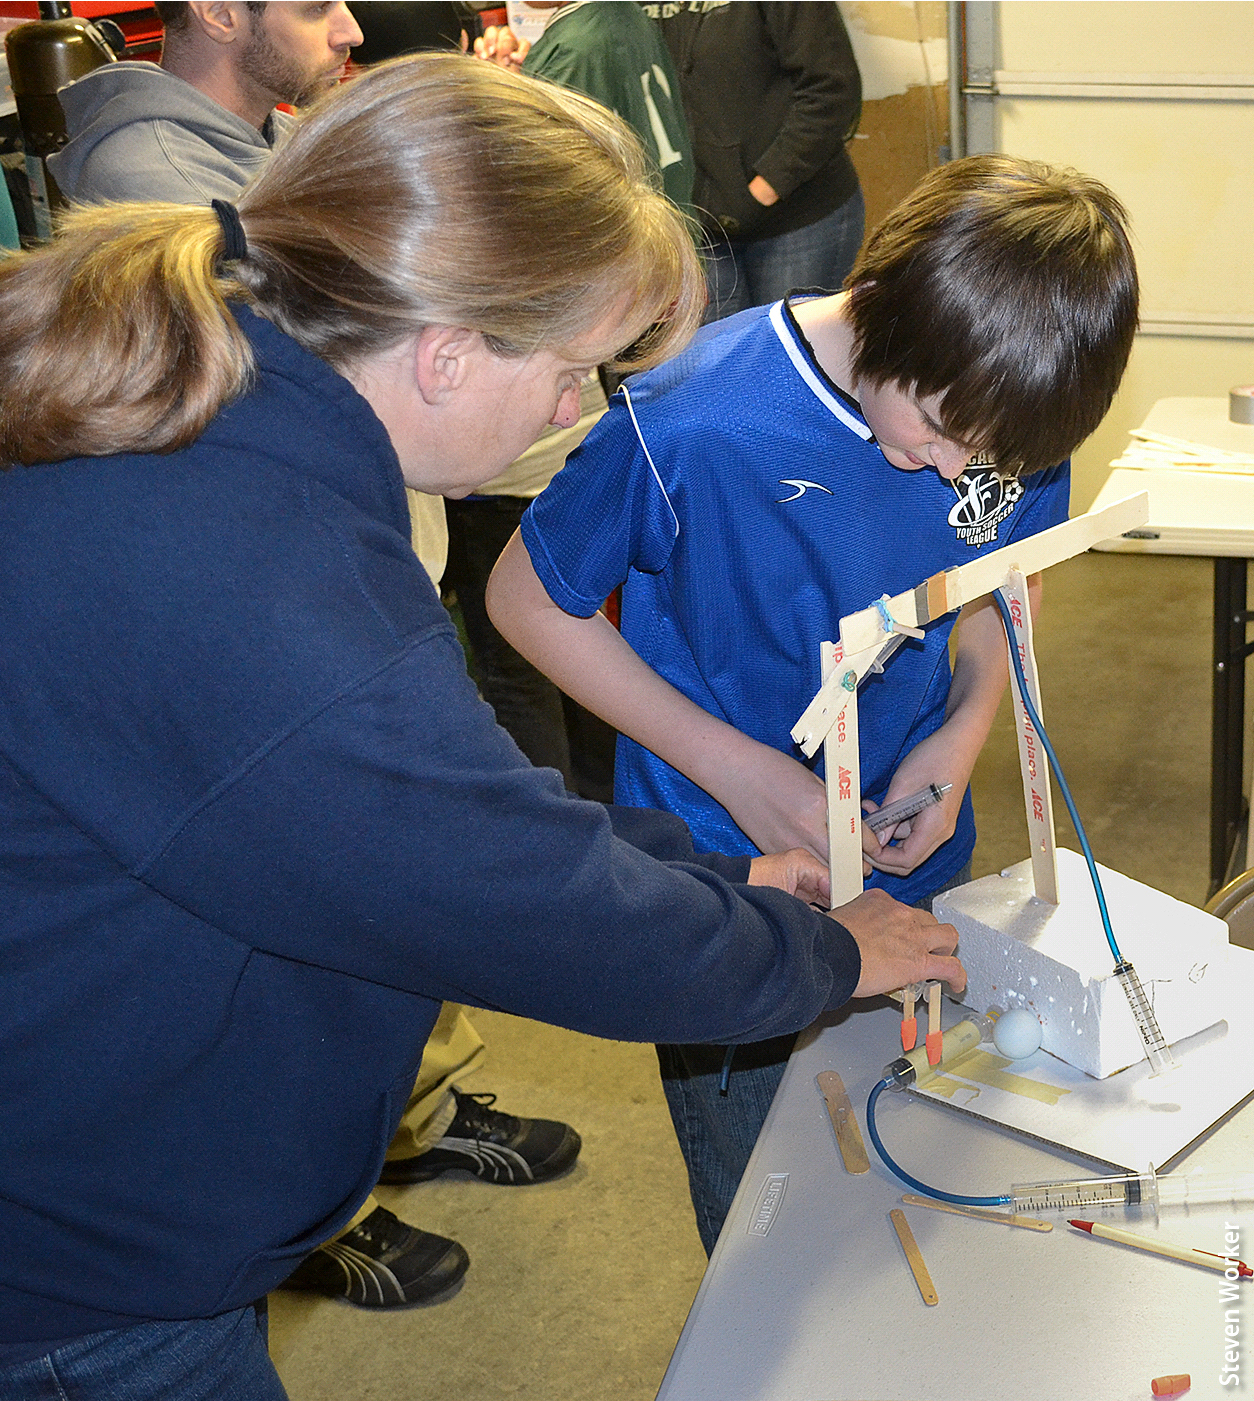 In the design and build participation structure, volunteer educators presented youth with a design challenge and asked them to design and build a device, such as the arm/gripper shown here, to solve the problem. Educators used a variety of teaching techniques for design and build, including targeted questions and offering specific design suggestions.